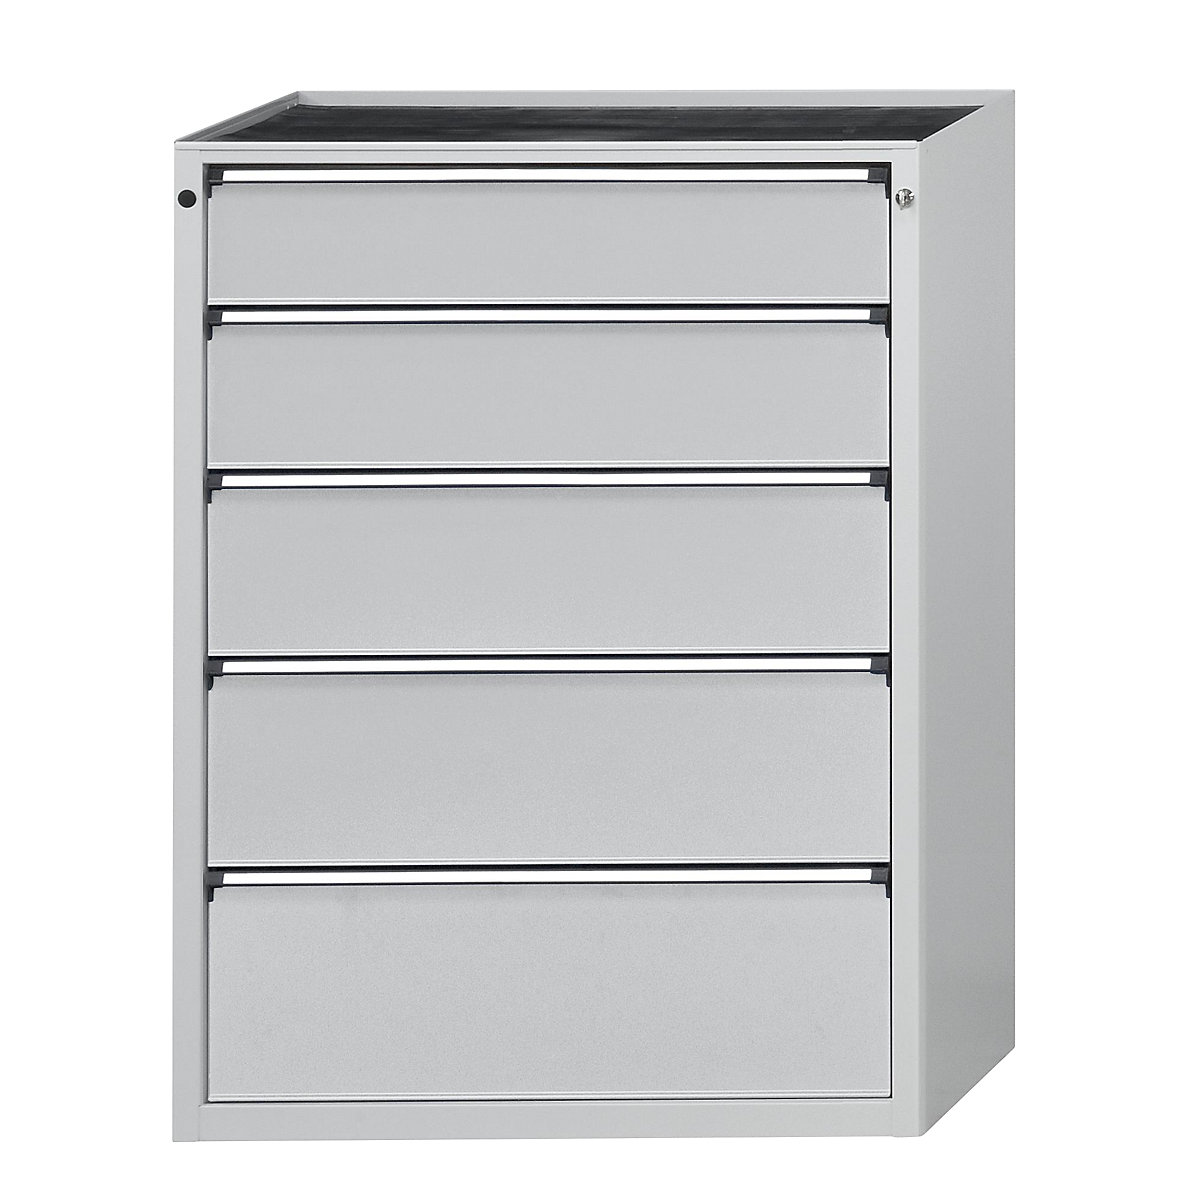 Drawer cupboard – ANKE, WxD 760 x 675 mm, 5 drawers, height 1280 mm, front in light grey-15